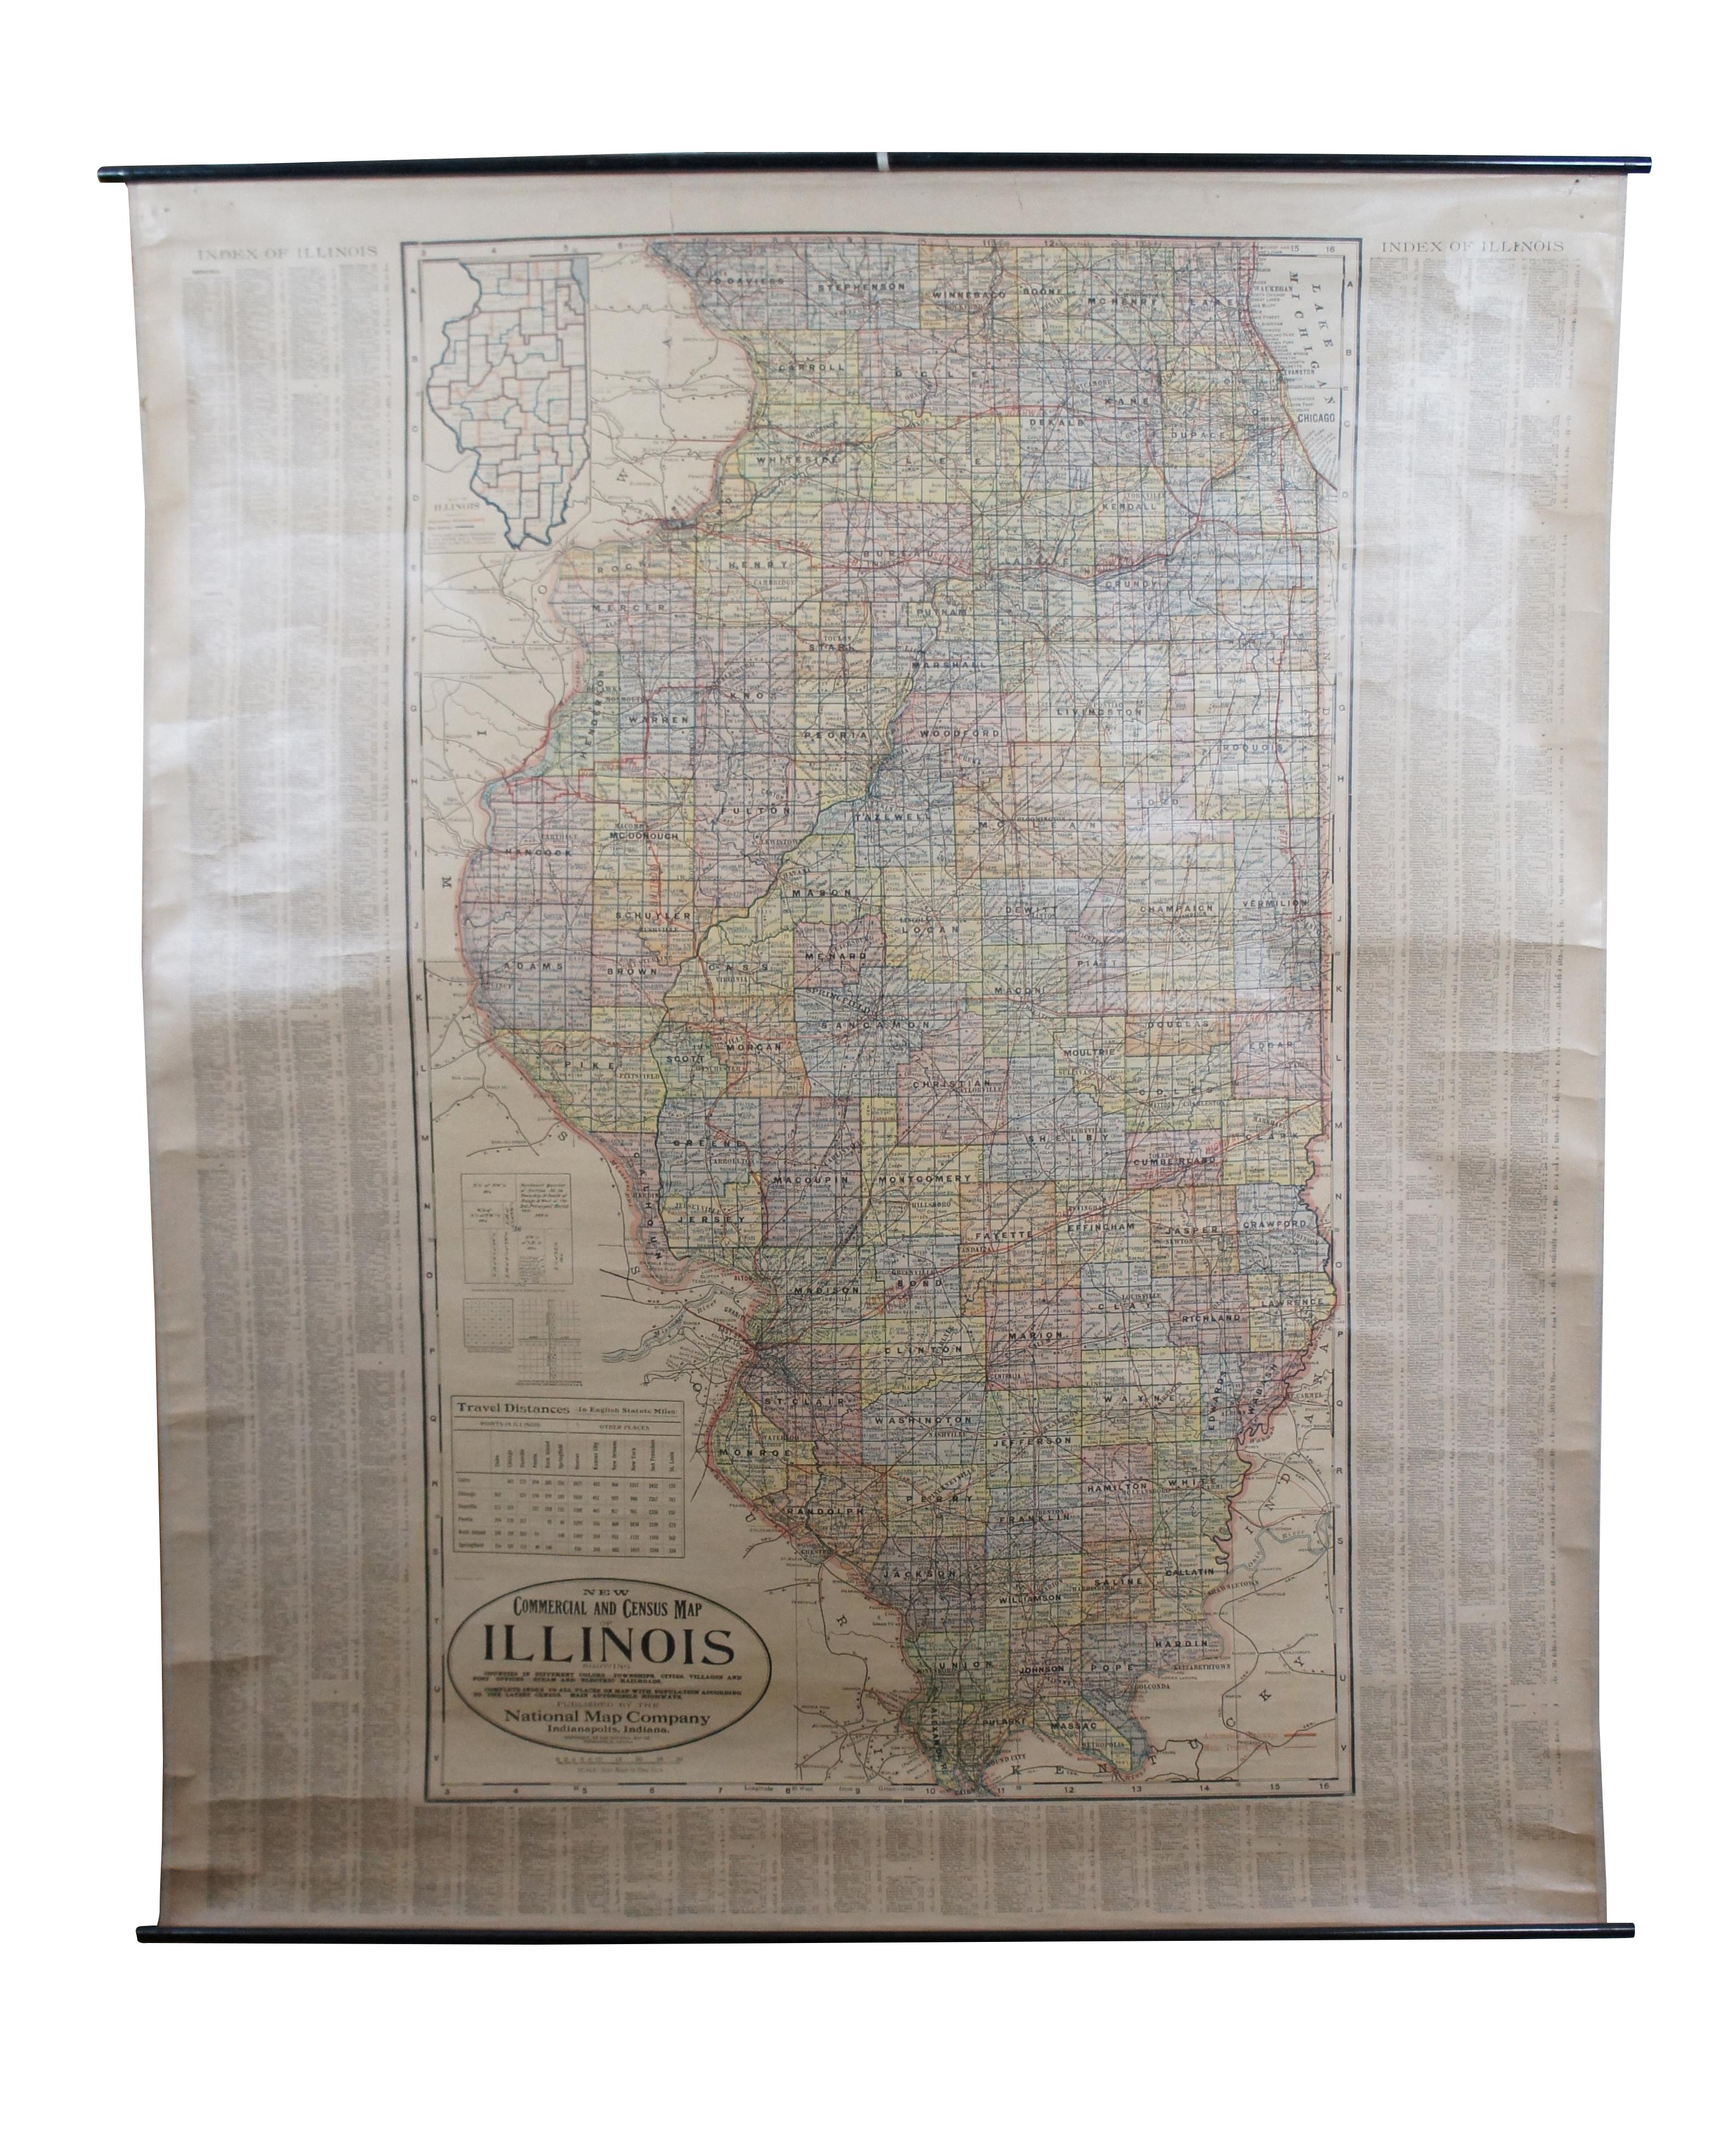 Antique early to mid 20th century double sided hanging map titled the New Commercial and Census Map of Illinois, Edition 1073. Verso shows the National Map of Chicago and Suburbs - Official Ward Boundaries - Quick Reference House Numbering System